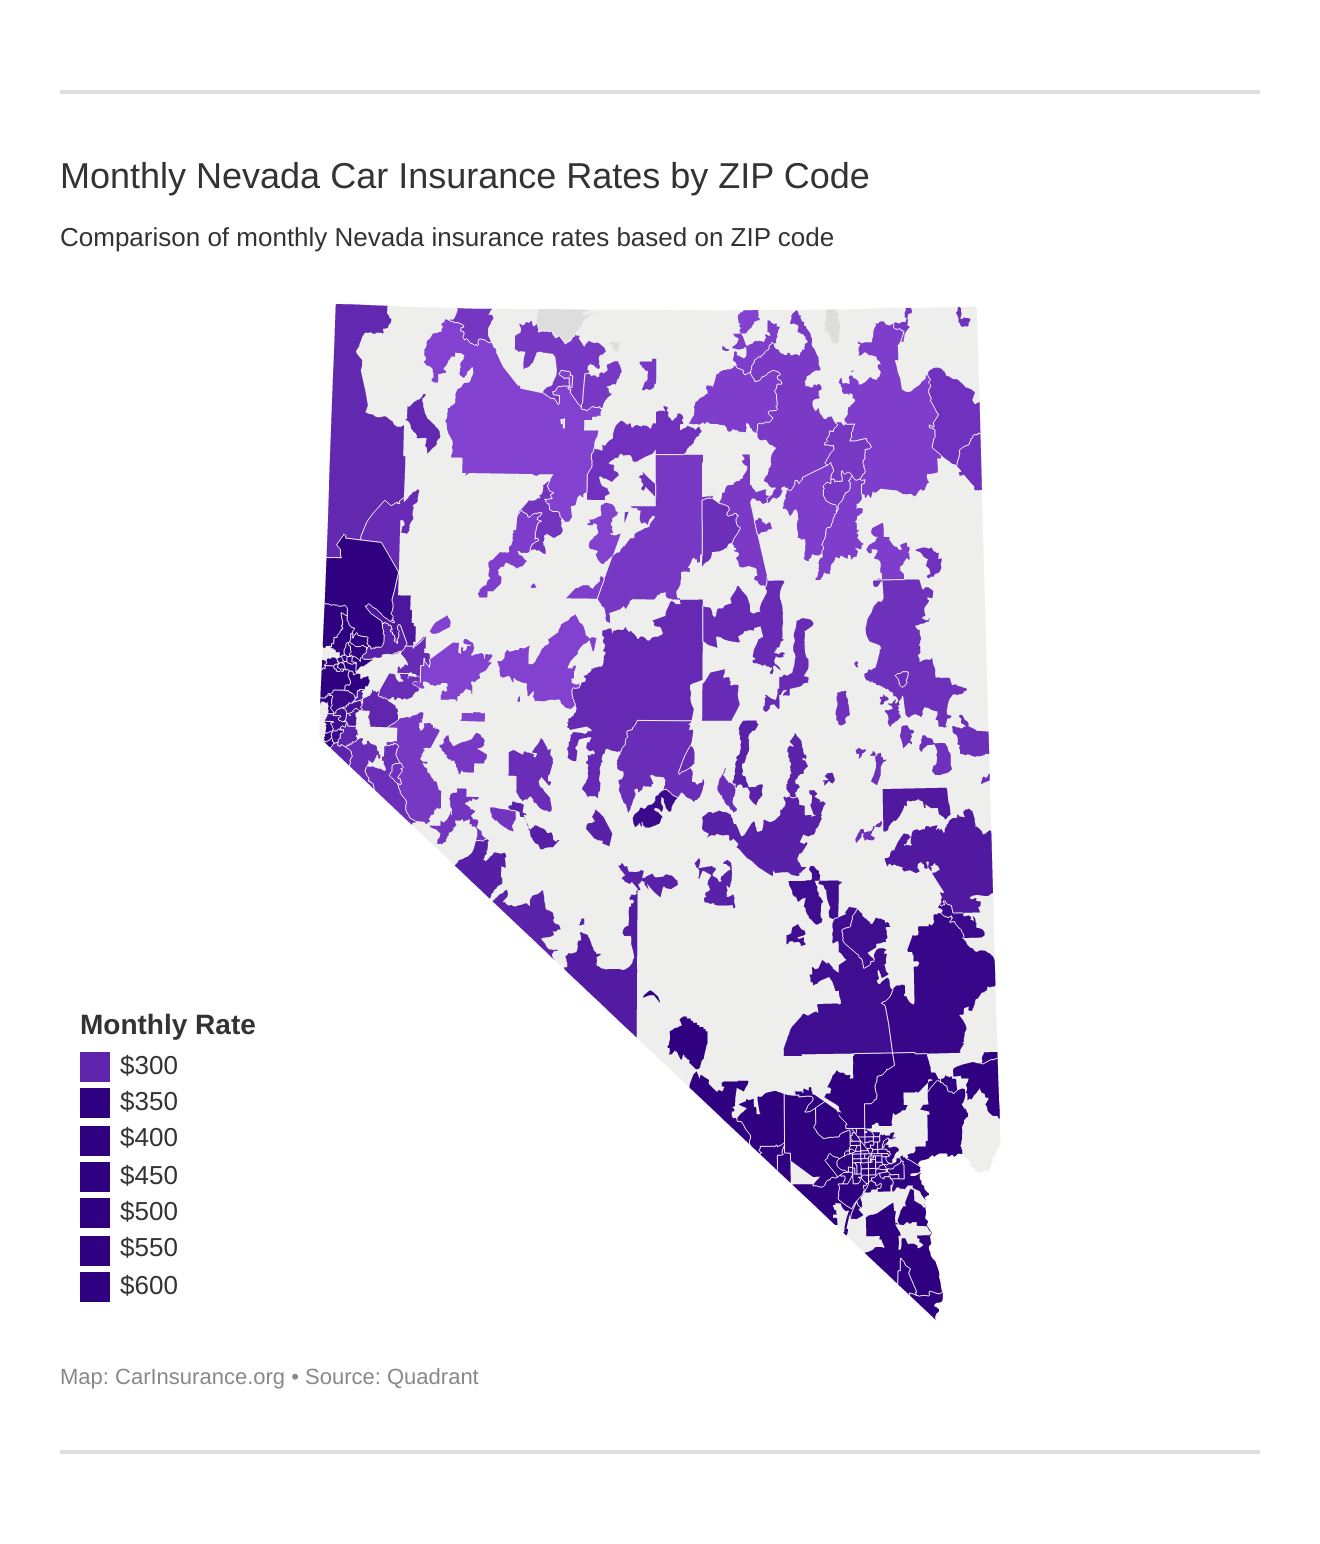 Monthly Nevada Car Insurance Rates by ZIP Code